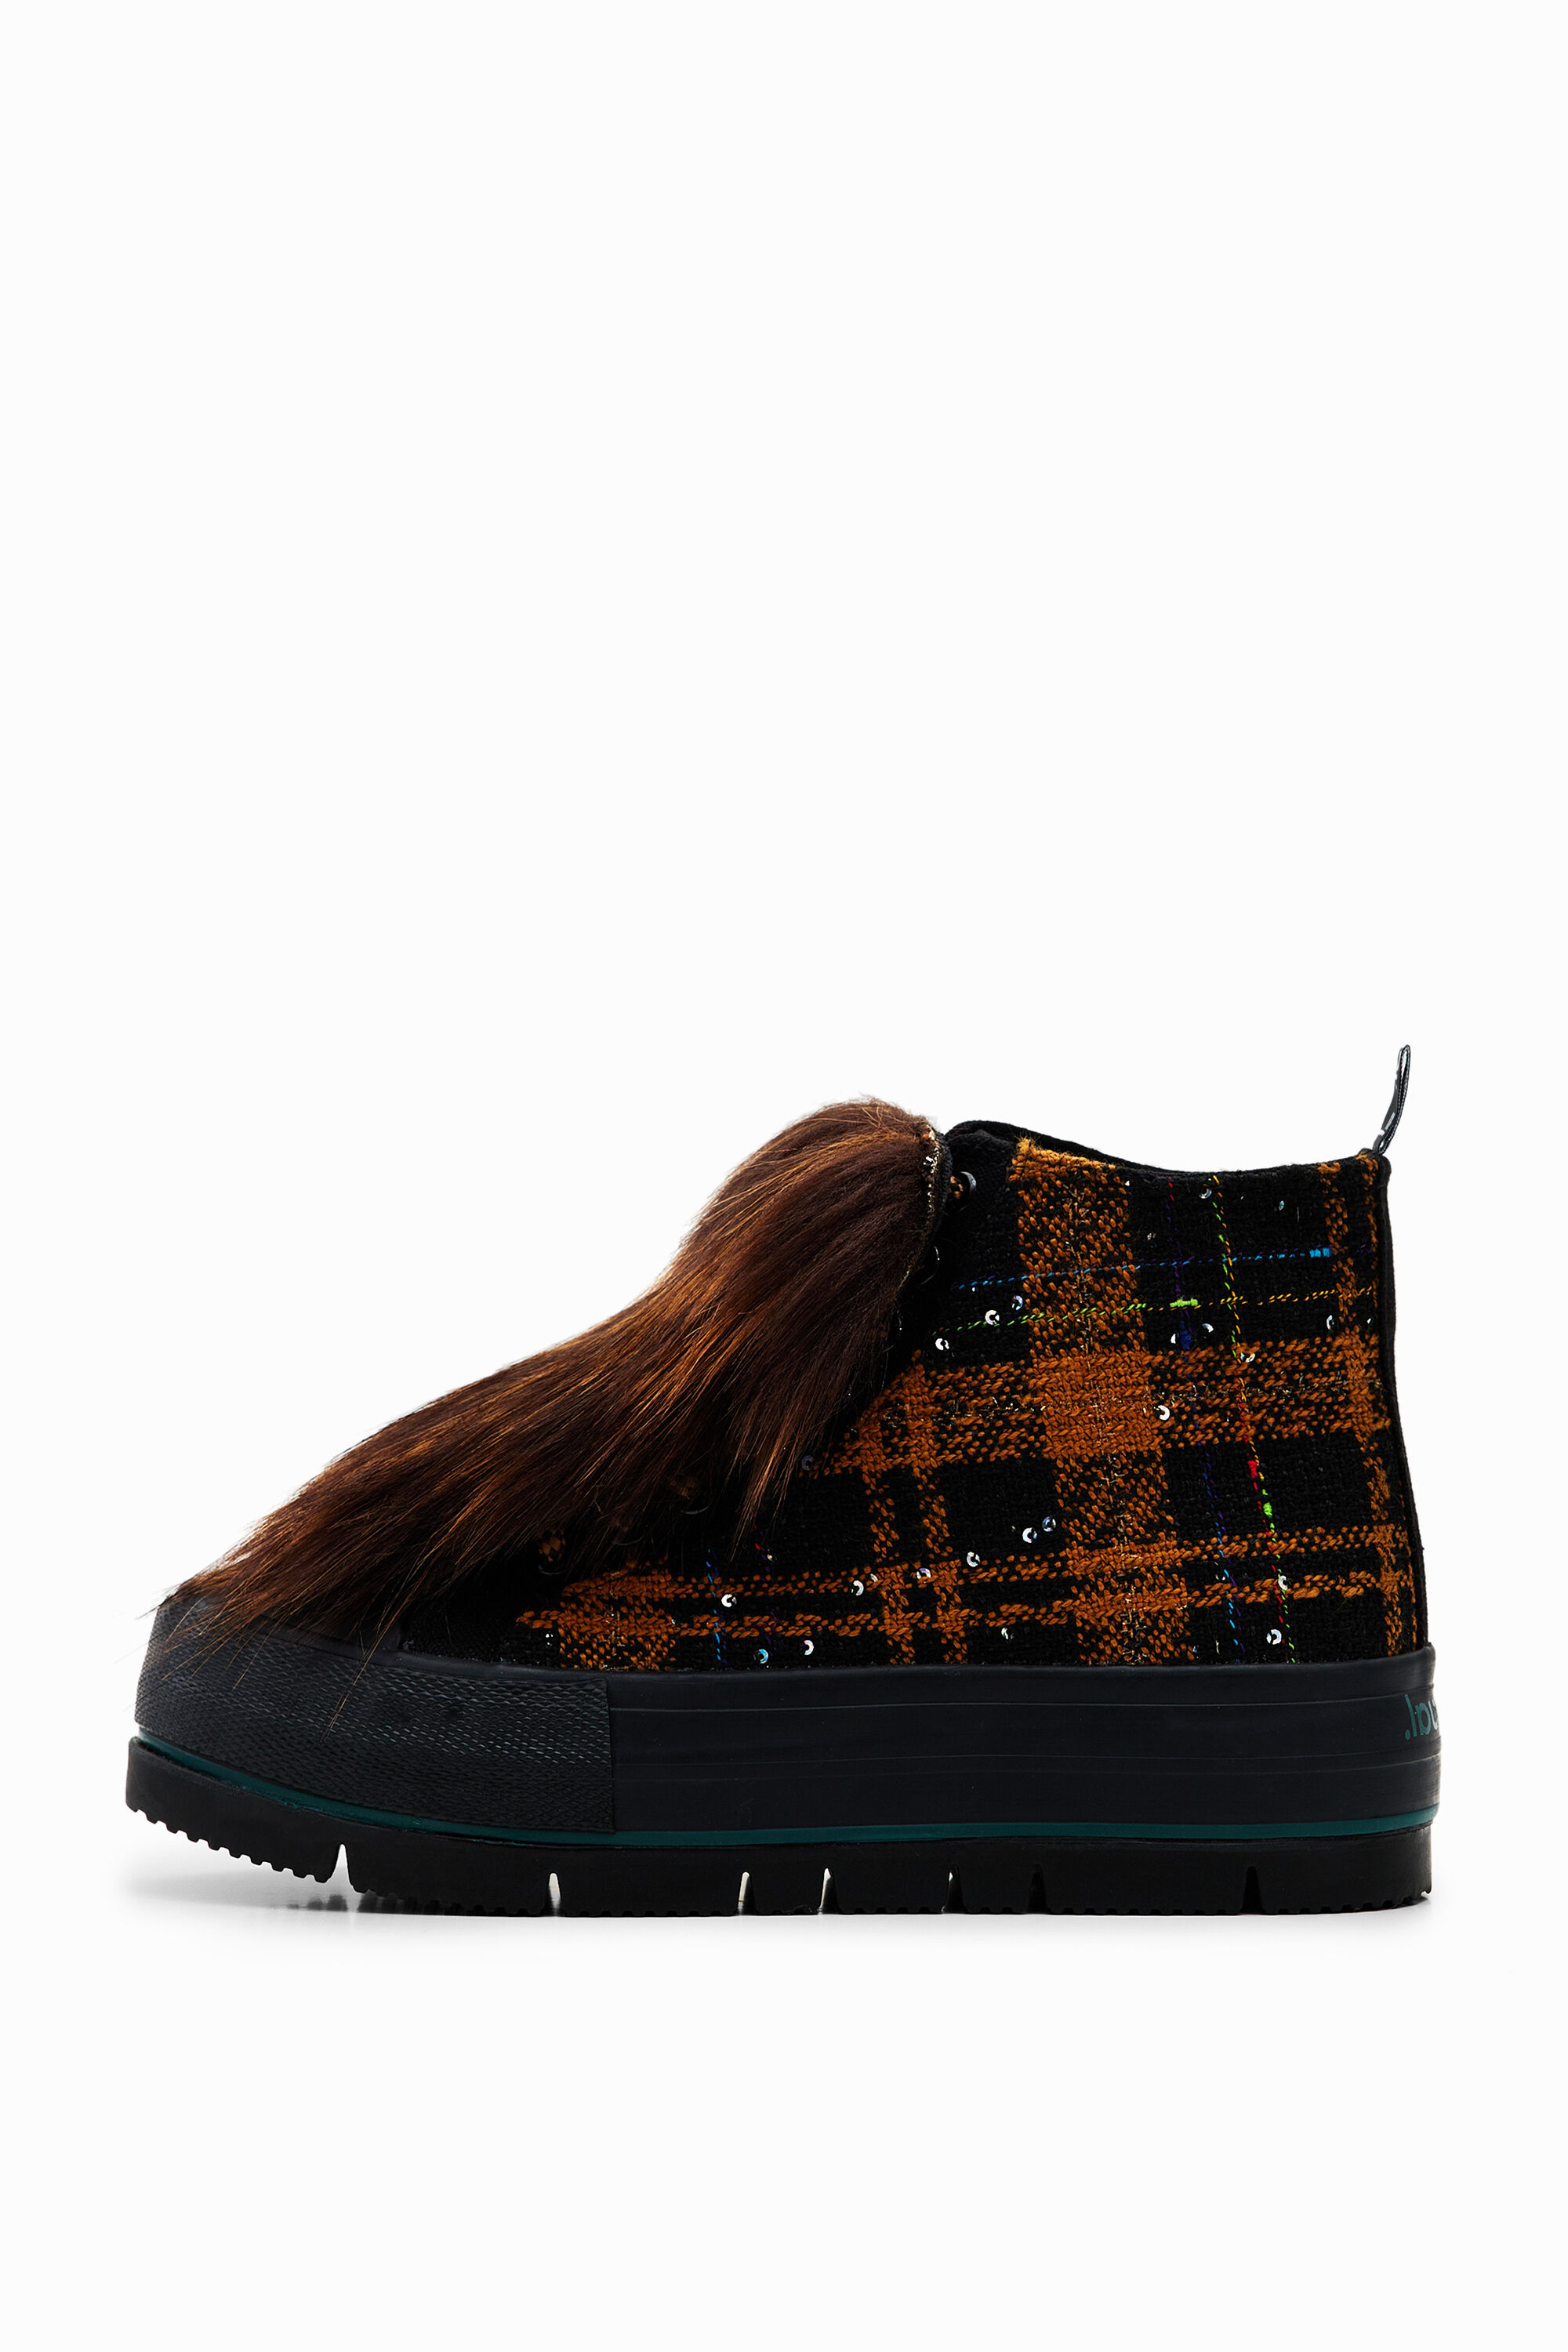 Fur platform high-top sneakers - MATERIAL FINISHES - 37